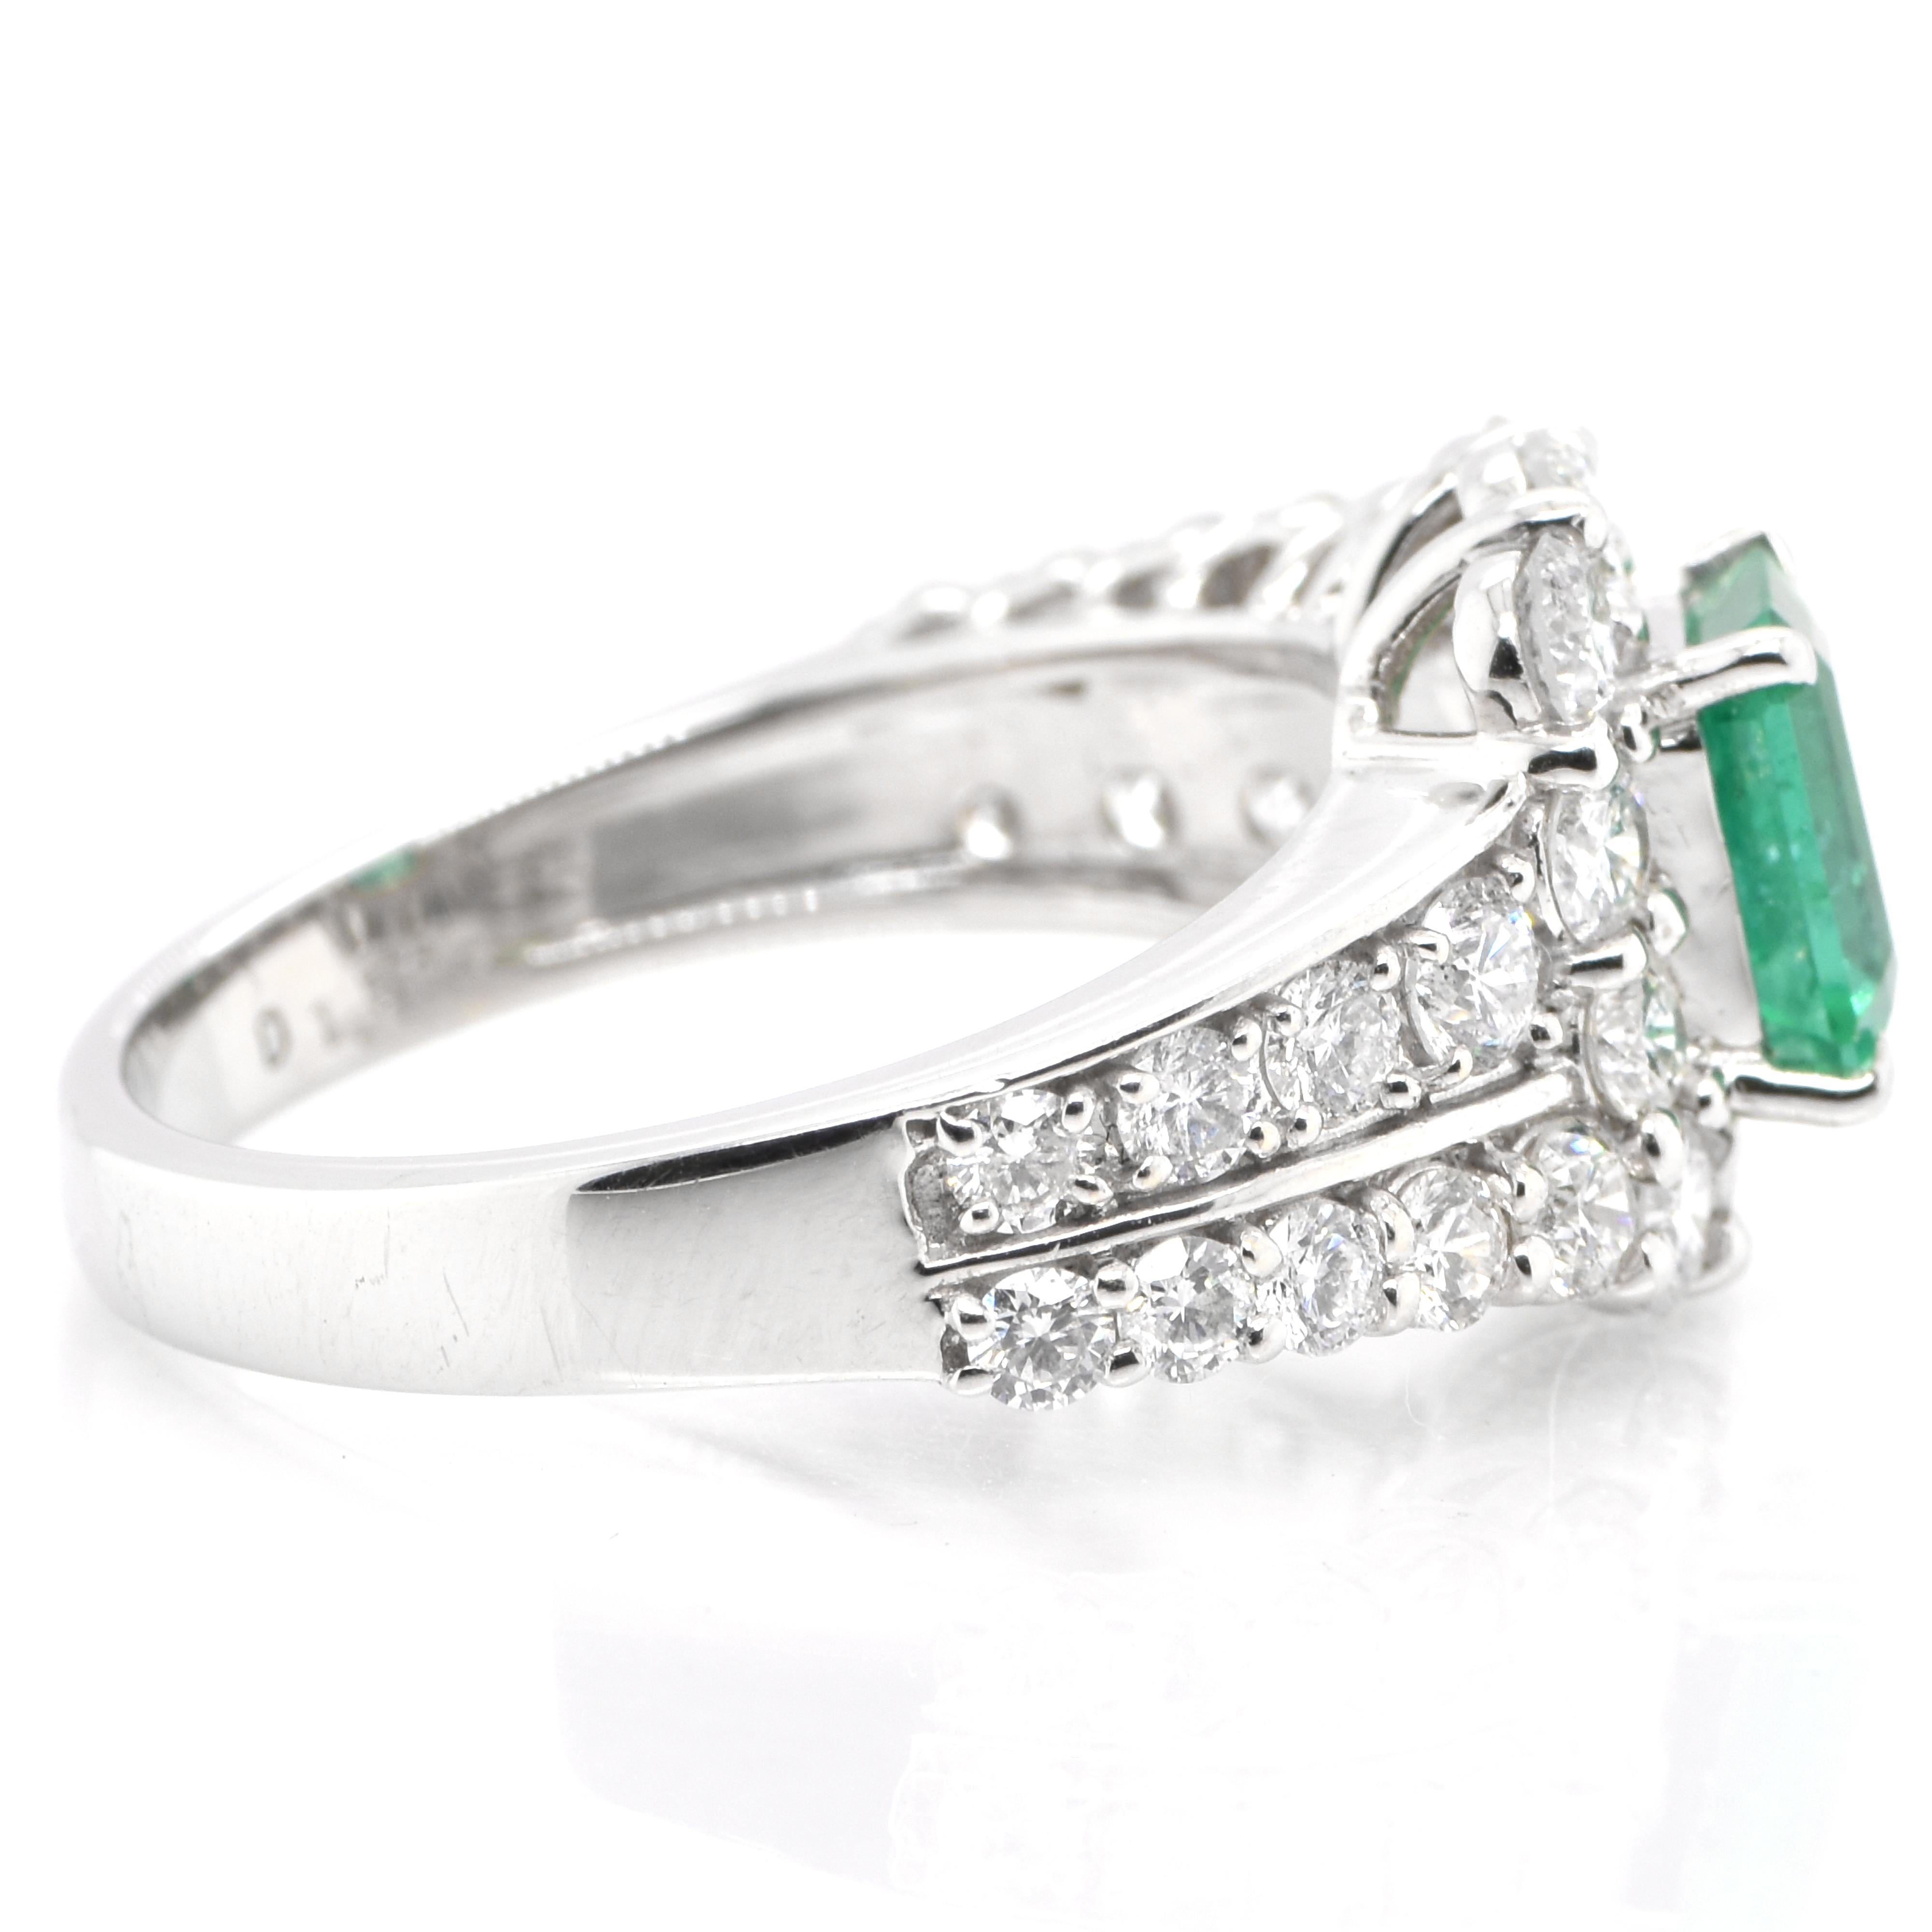 Emerald Cut 0.87 Carat Natural Emerald and Diamond Ring Set in Platinum For Sale